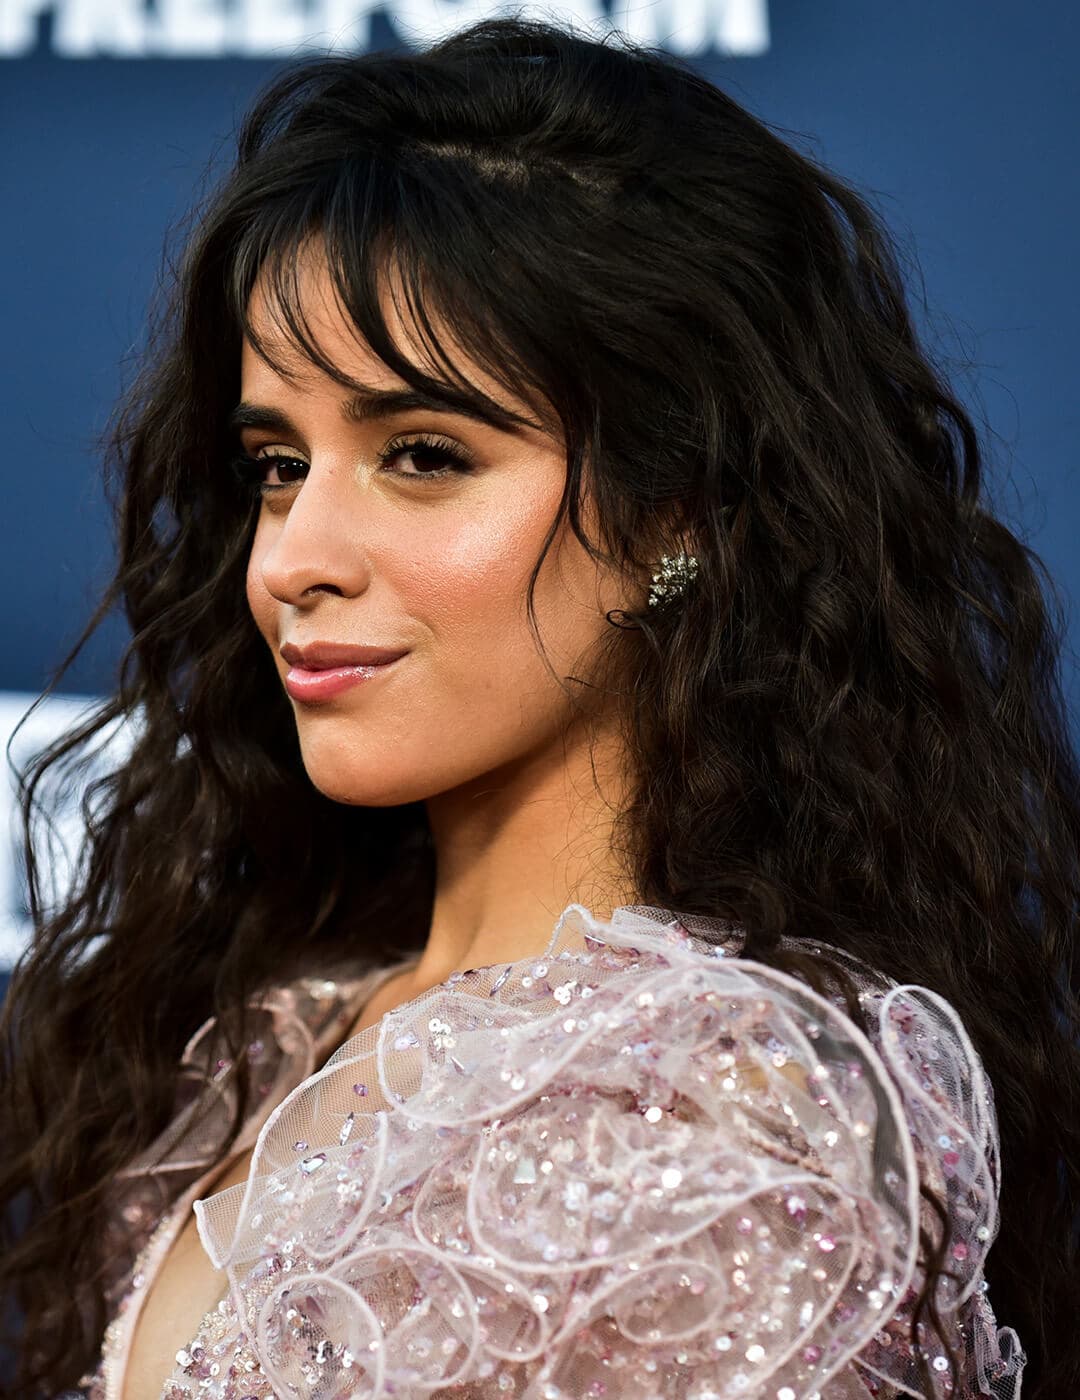 Camila Cabello attends Variety's Power of Young Hollywood at The H Club Los Angeles on August 06, 2019 in Los Angeles, California.